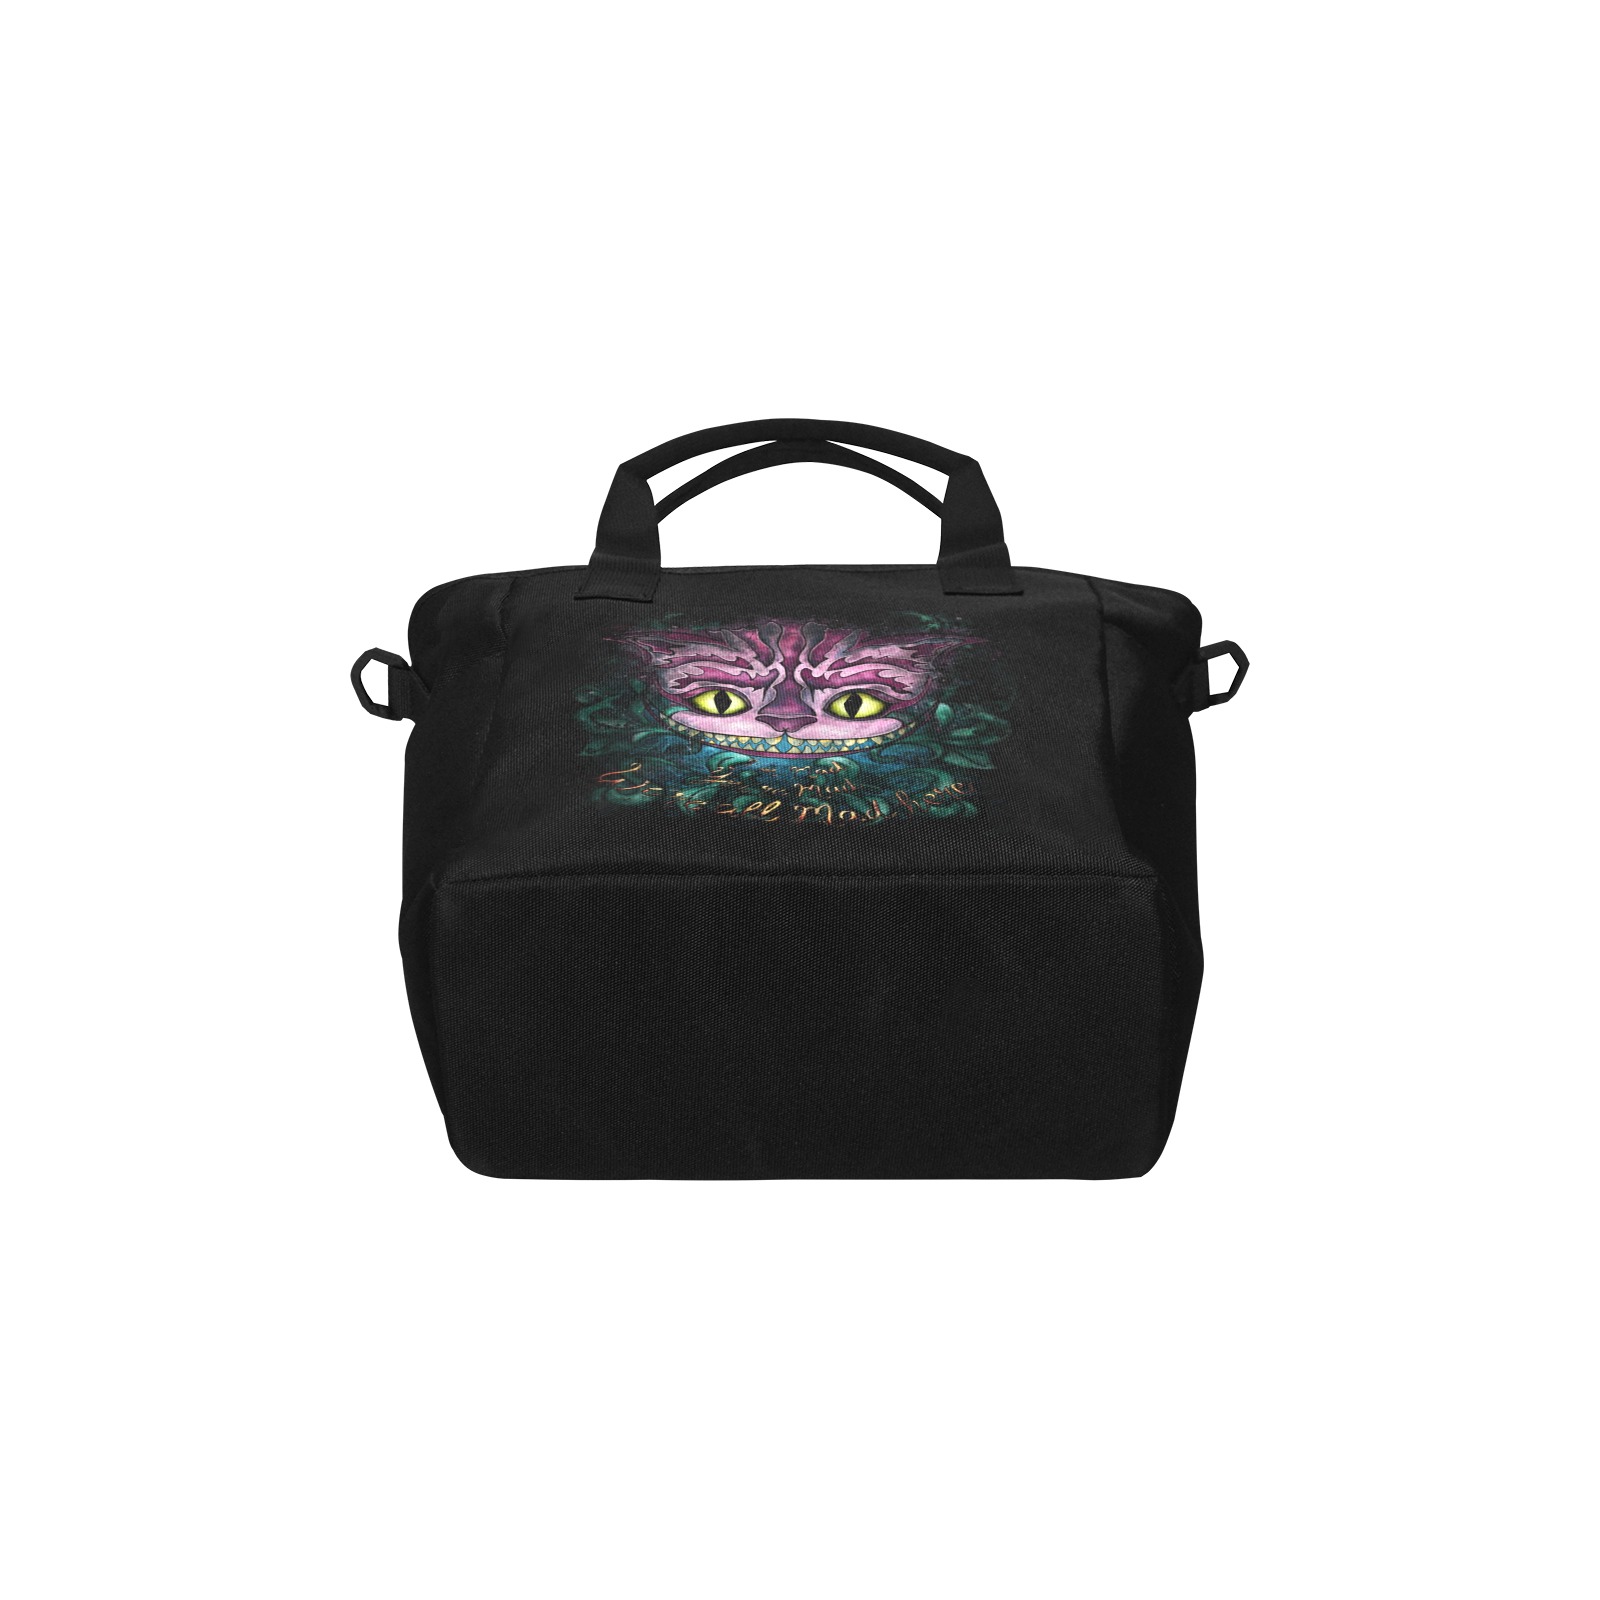 Cheshire cat Insulated Tote Bag with Shoulder Strap (Model 1724)